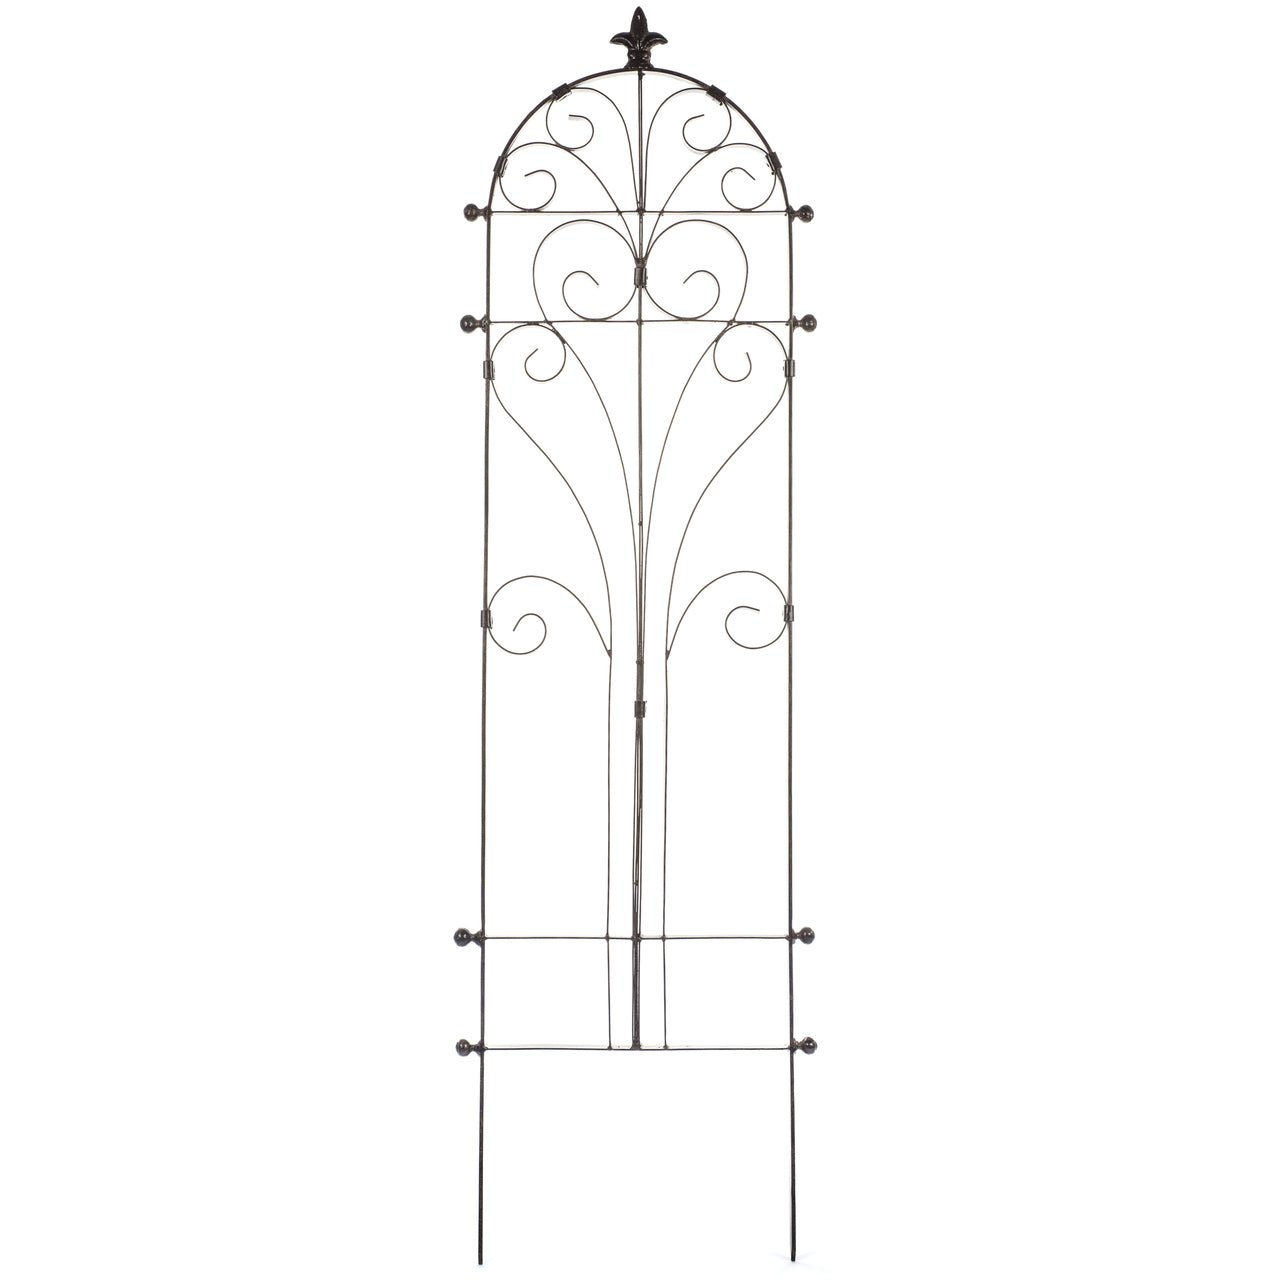 H Potter Wall Trellis trellises metal garden Outdoor Decor screen wrought iron vine ivy pot  rose patio wire tomato wedding planter decoration small vegetable lattice large privacy Moroccan scroll flower tall spiral